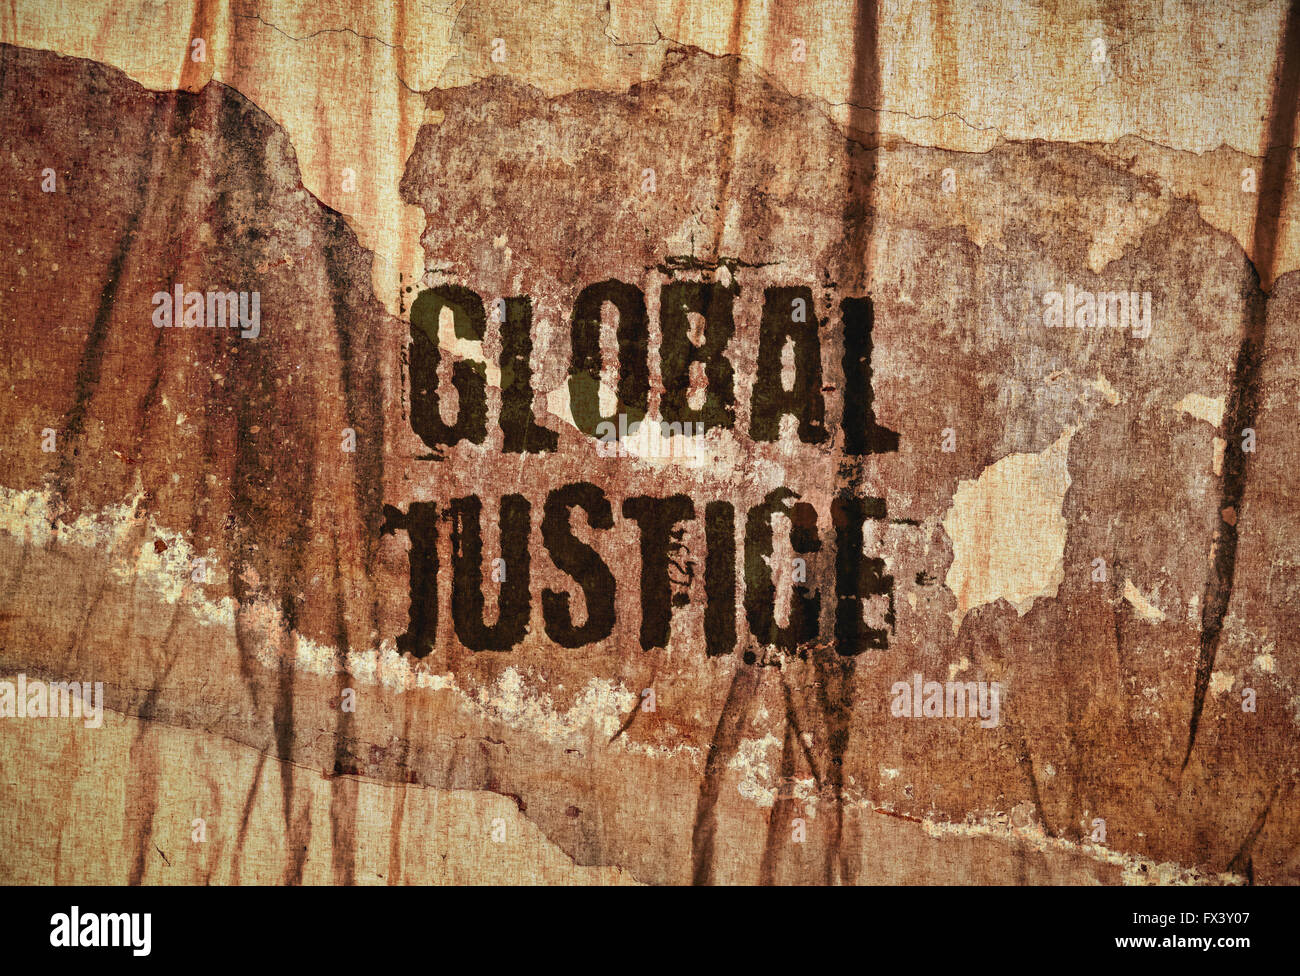 Text Global Justice written on rough textured brown background Stock Photo